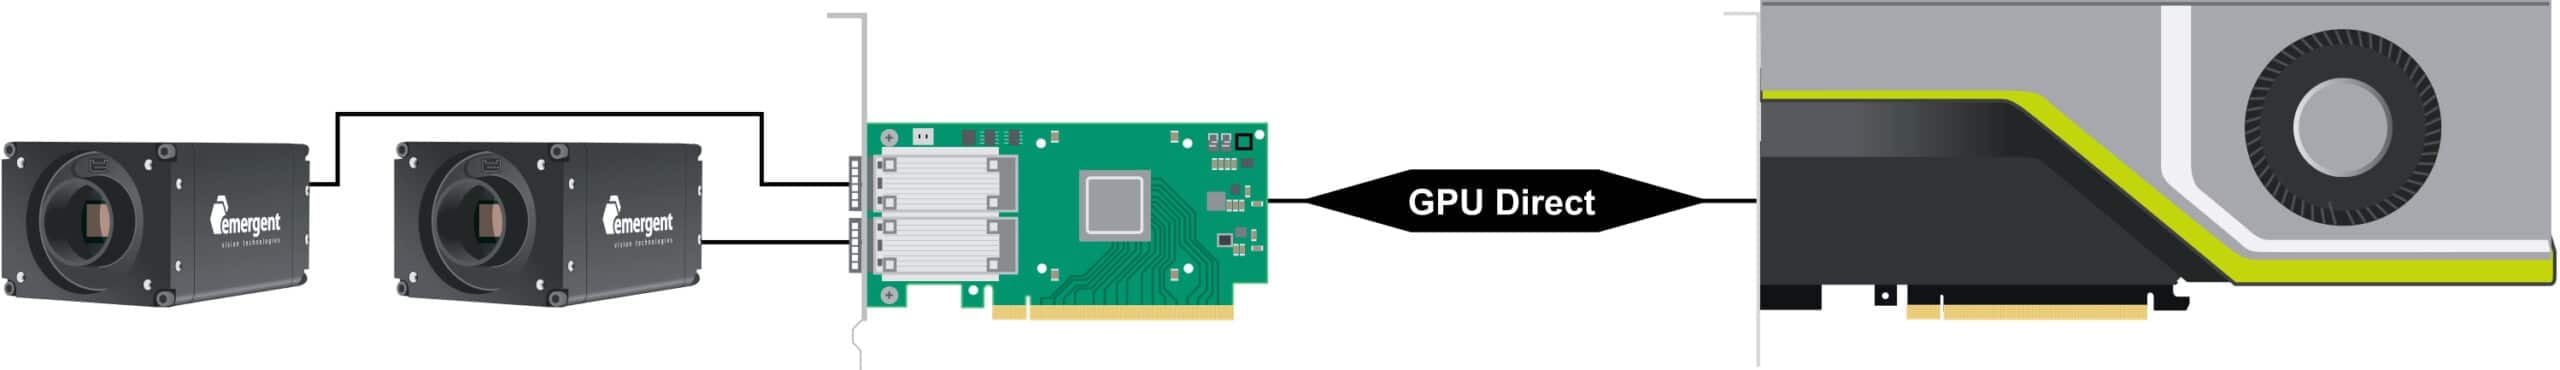 GPU Direct feature with high-speed GigE Vision cameras